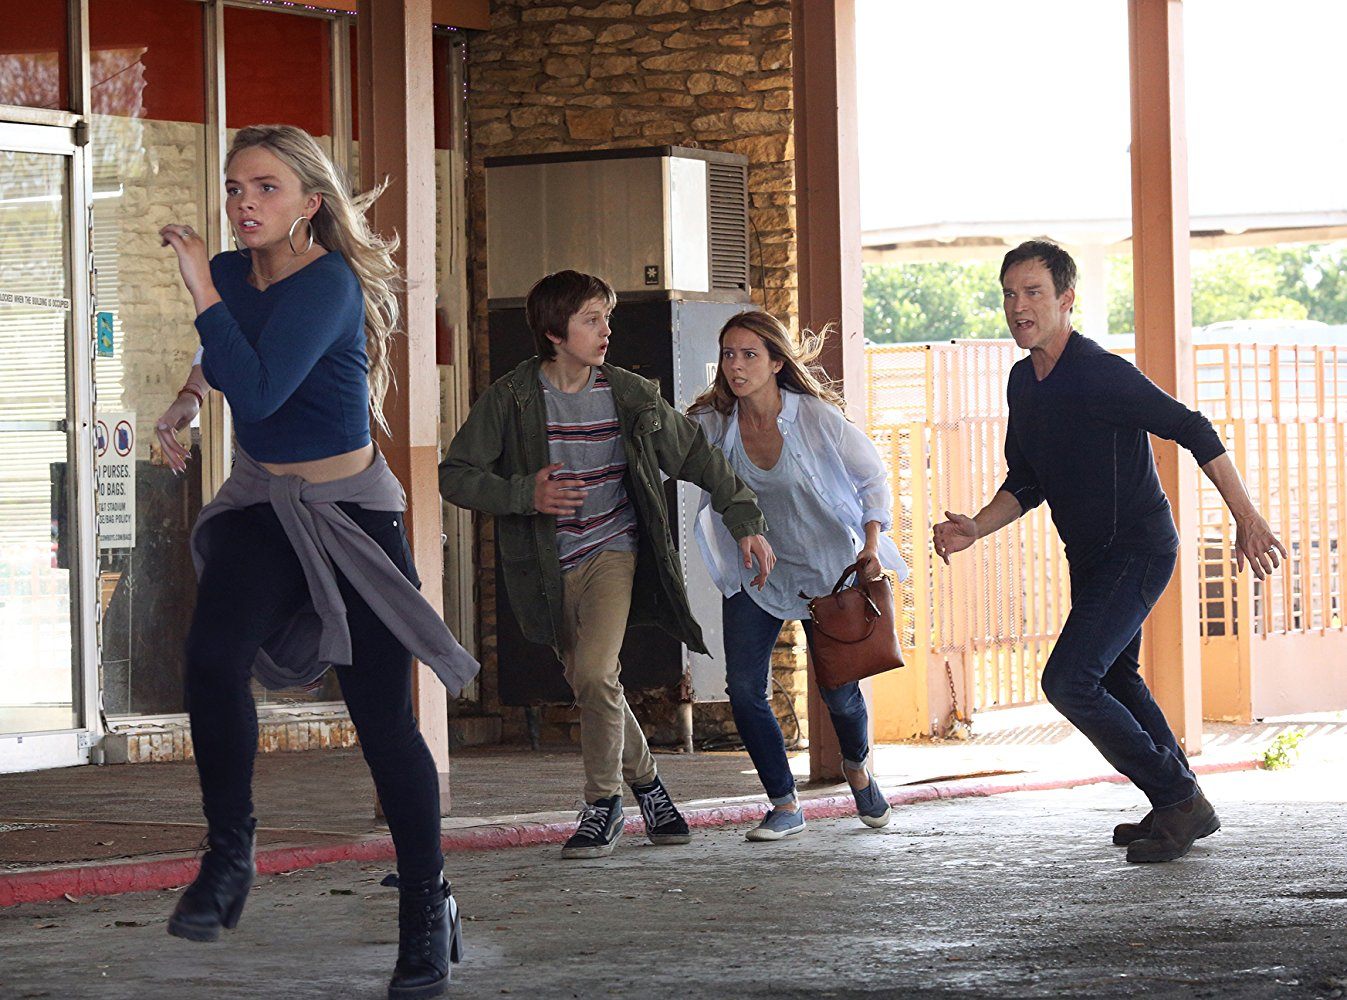 Lauren, Andy, Caitlin, and Reed Strucker running in front of a building